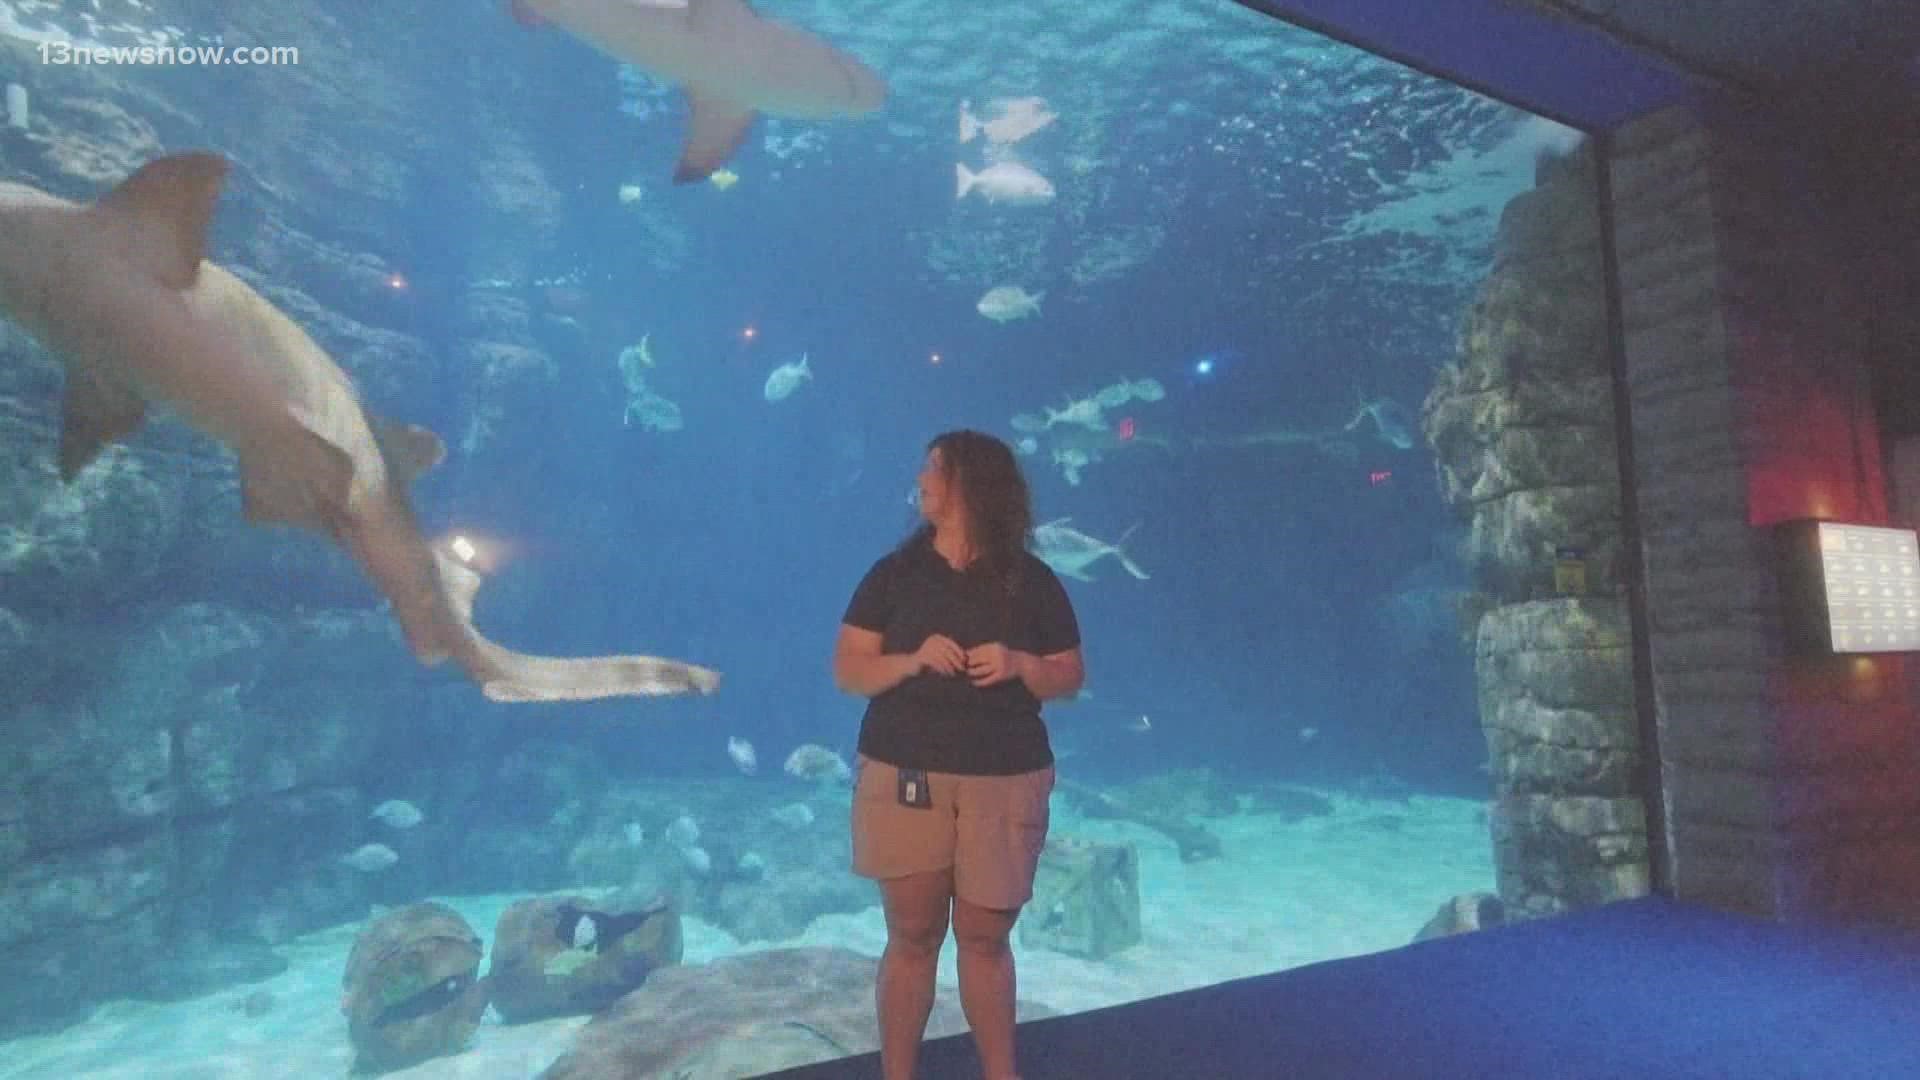 The sharks at the aquarium all have different personalities.